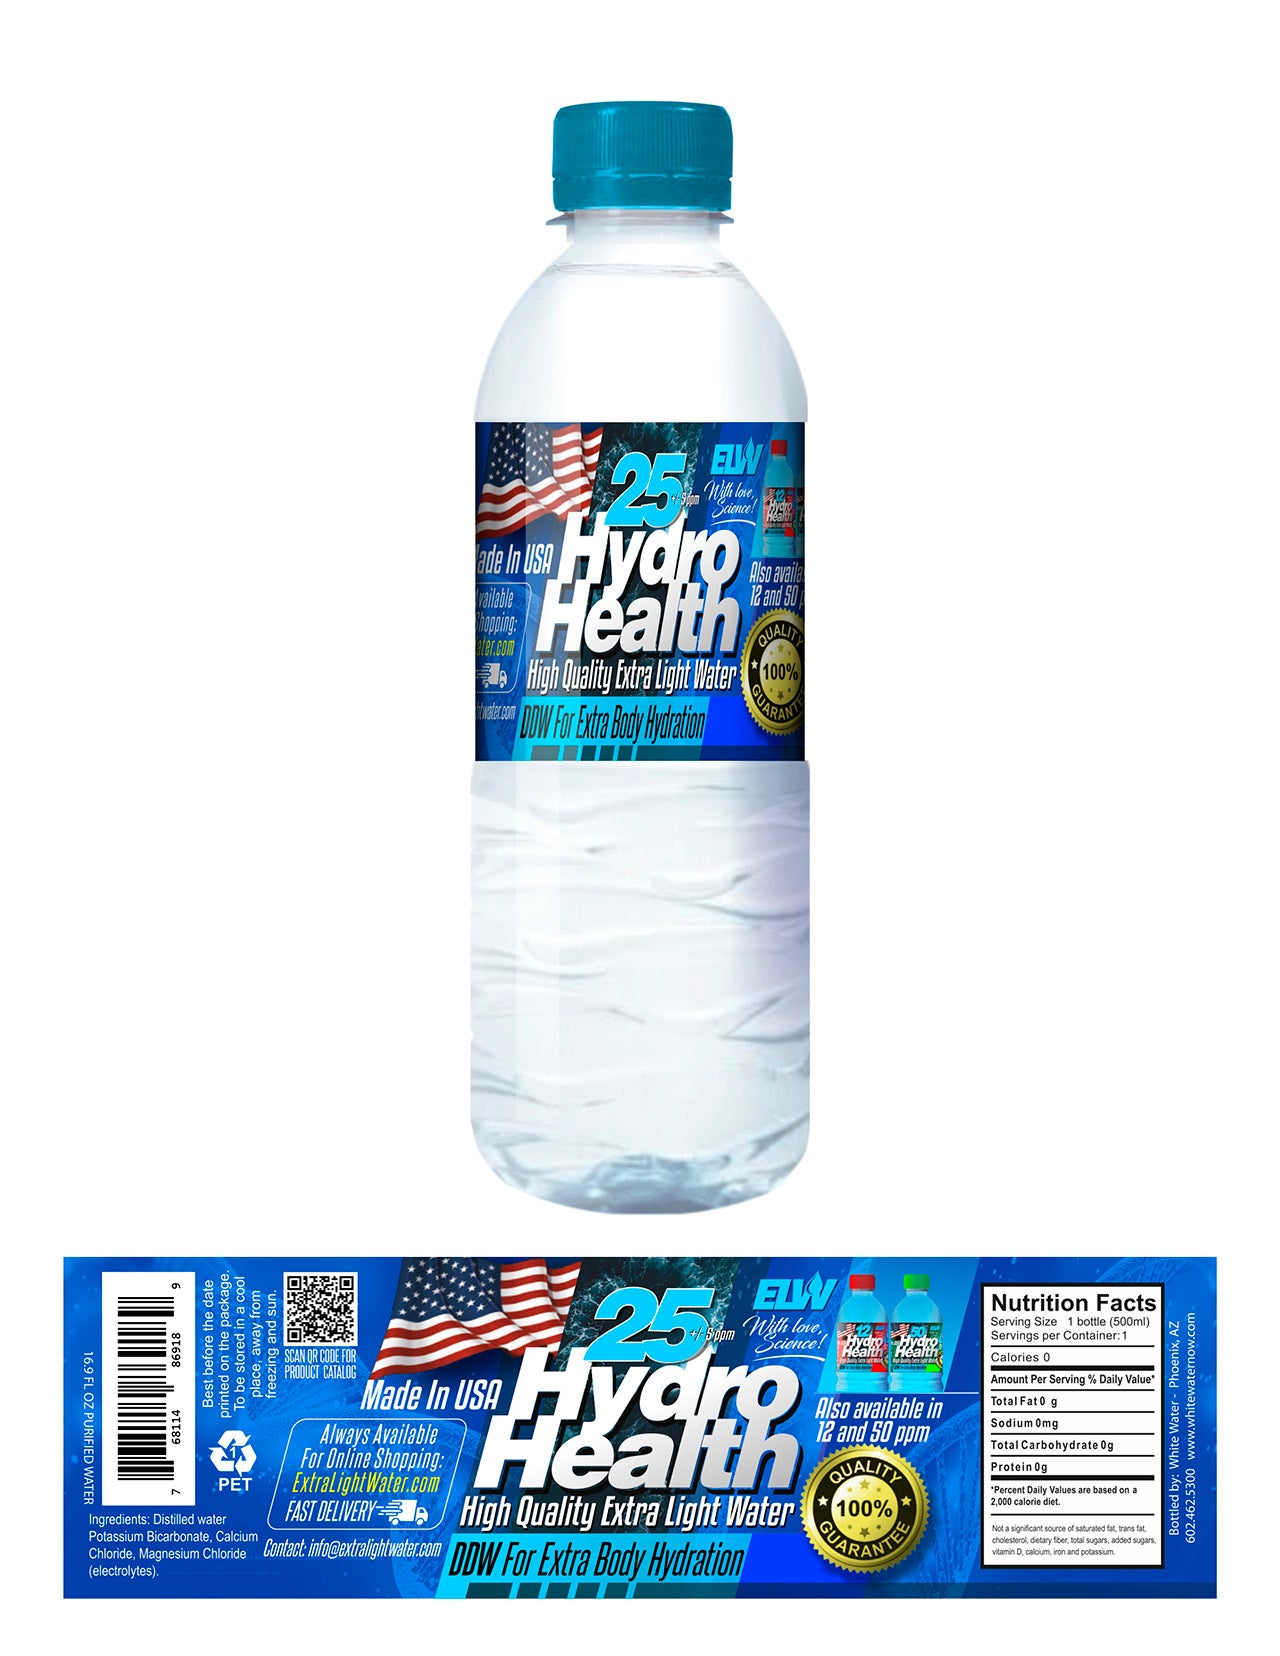 25 HydroHealth (24 bottles x 500ml Box) $190 incl.S&H-no PO box- Choose a subscription plan and save up to 10%